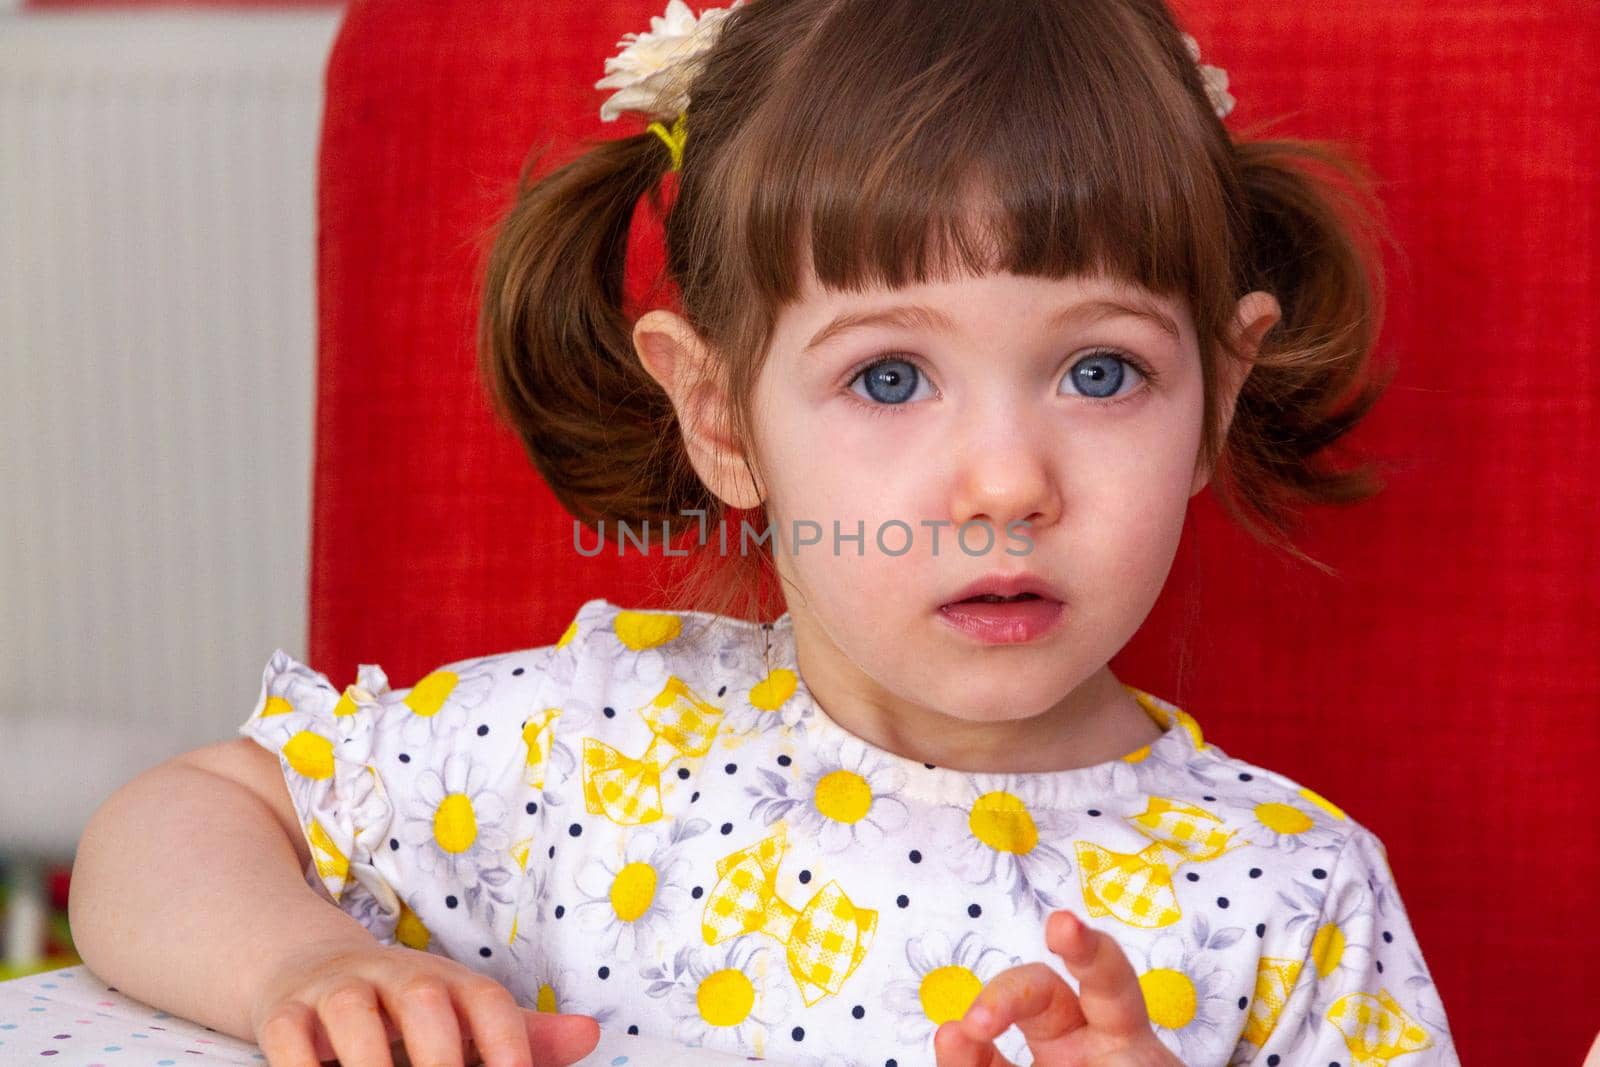 A cute, brown-haired, blue-eyed baby girls with pigtails sitting in an orange chair and looking at camera